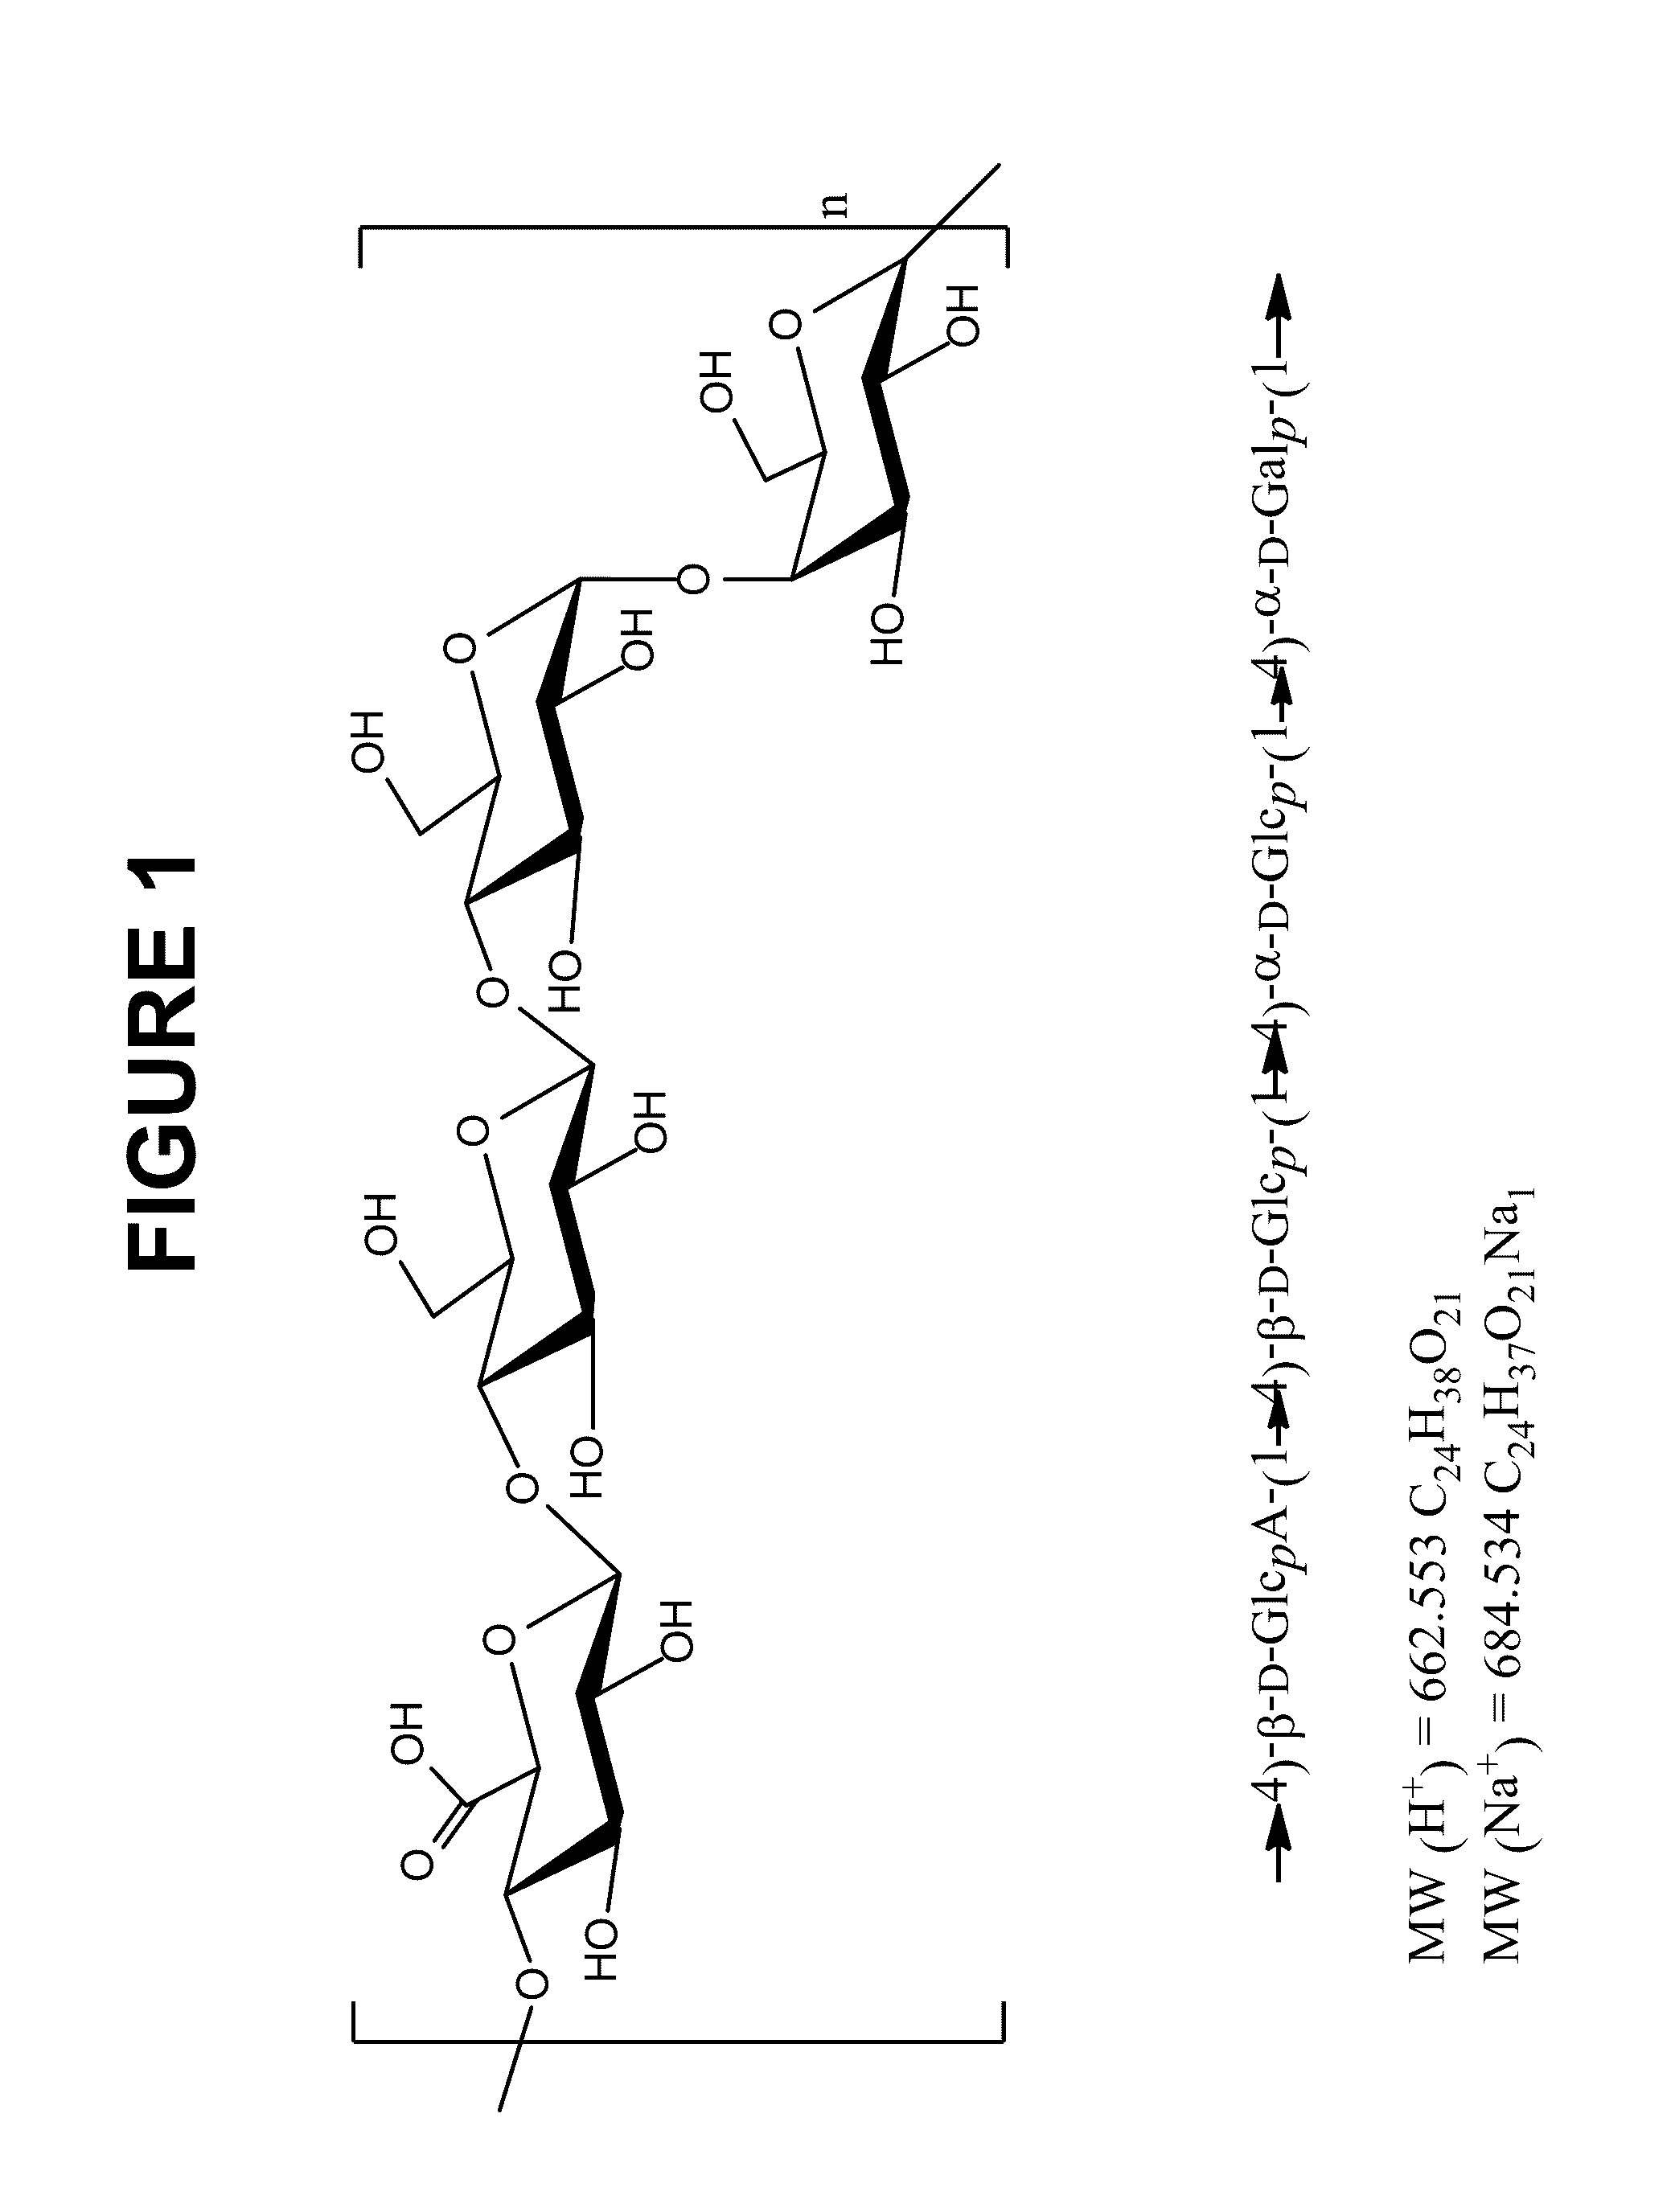 Immunogenic compositions comprising conjugated capsular saccharide antigens and uses thereof